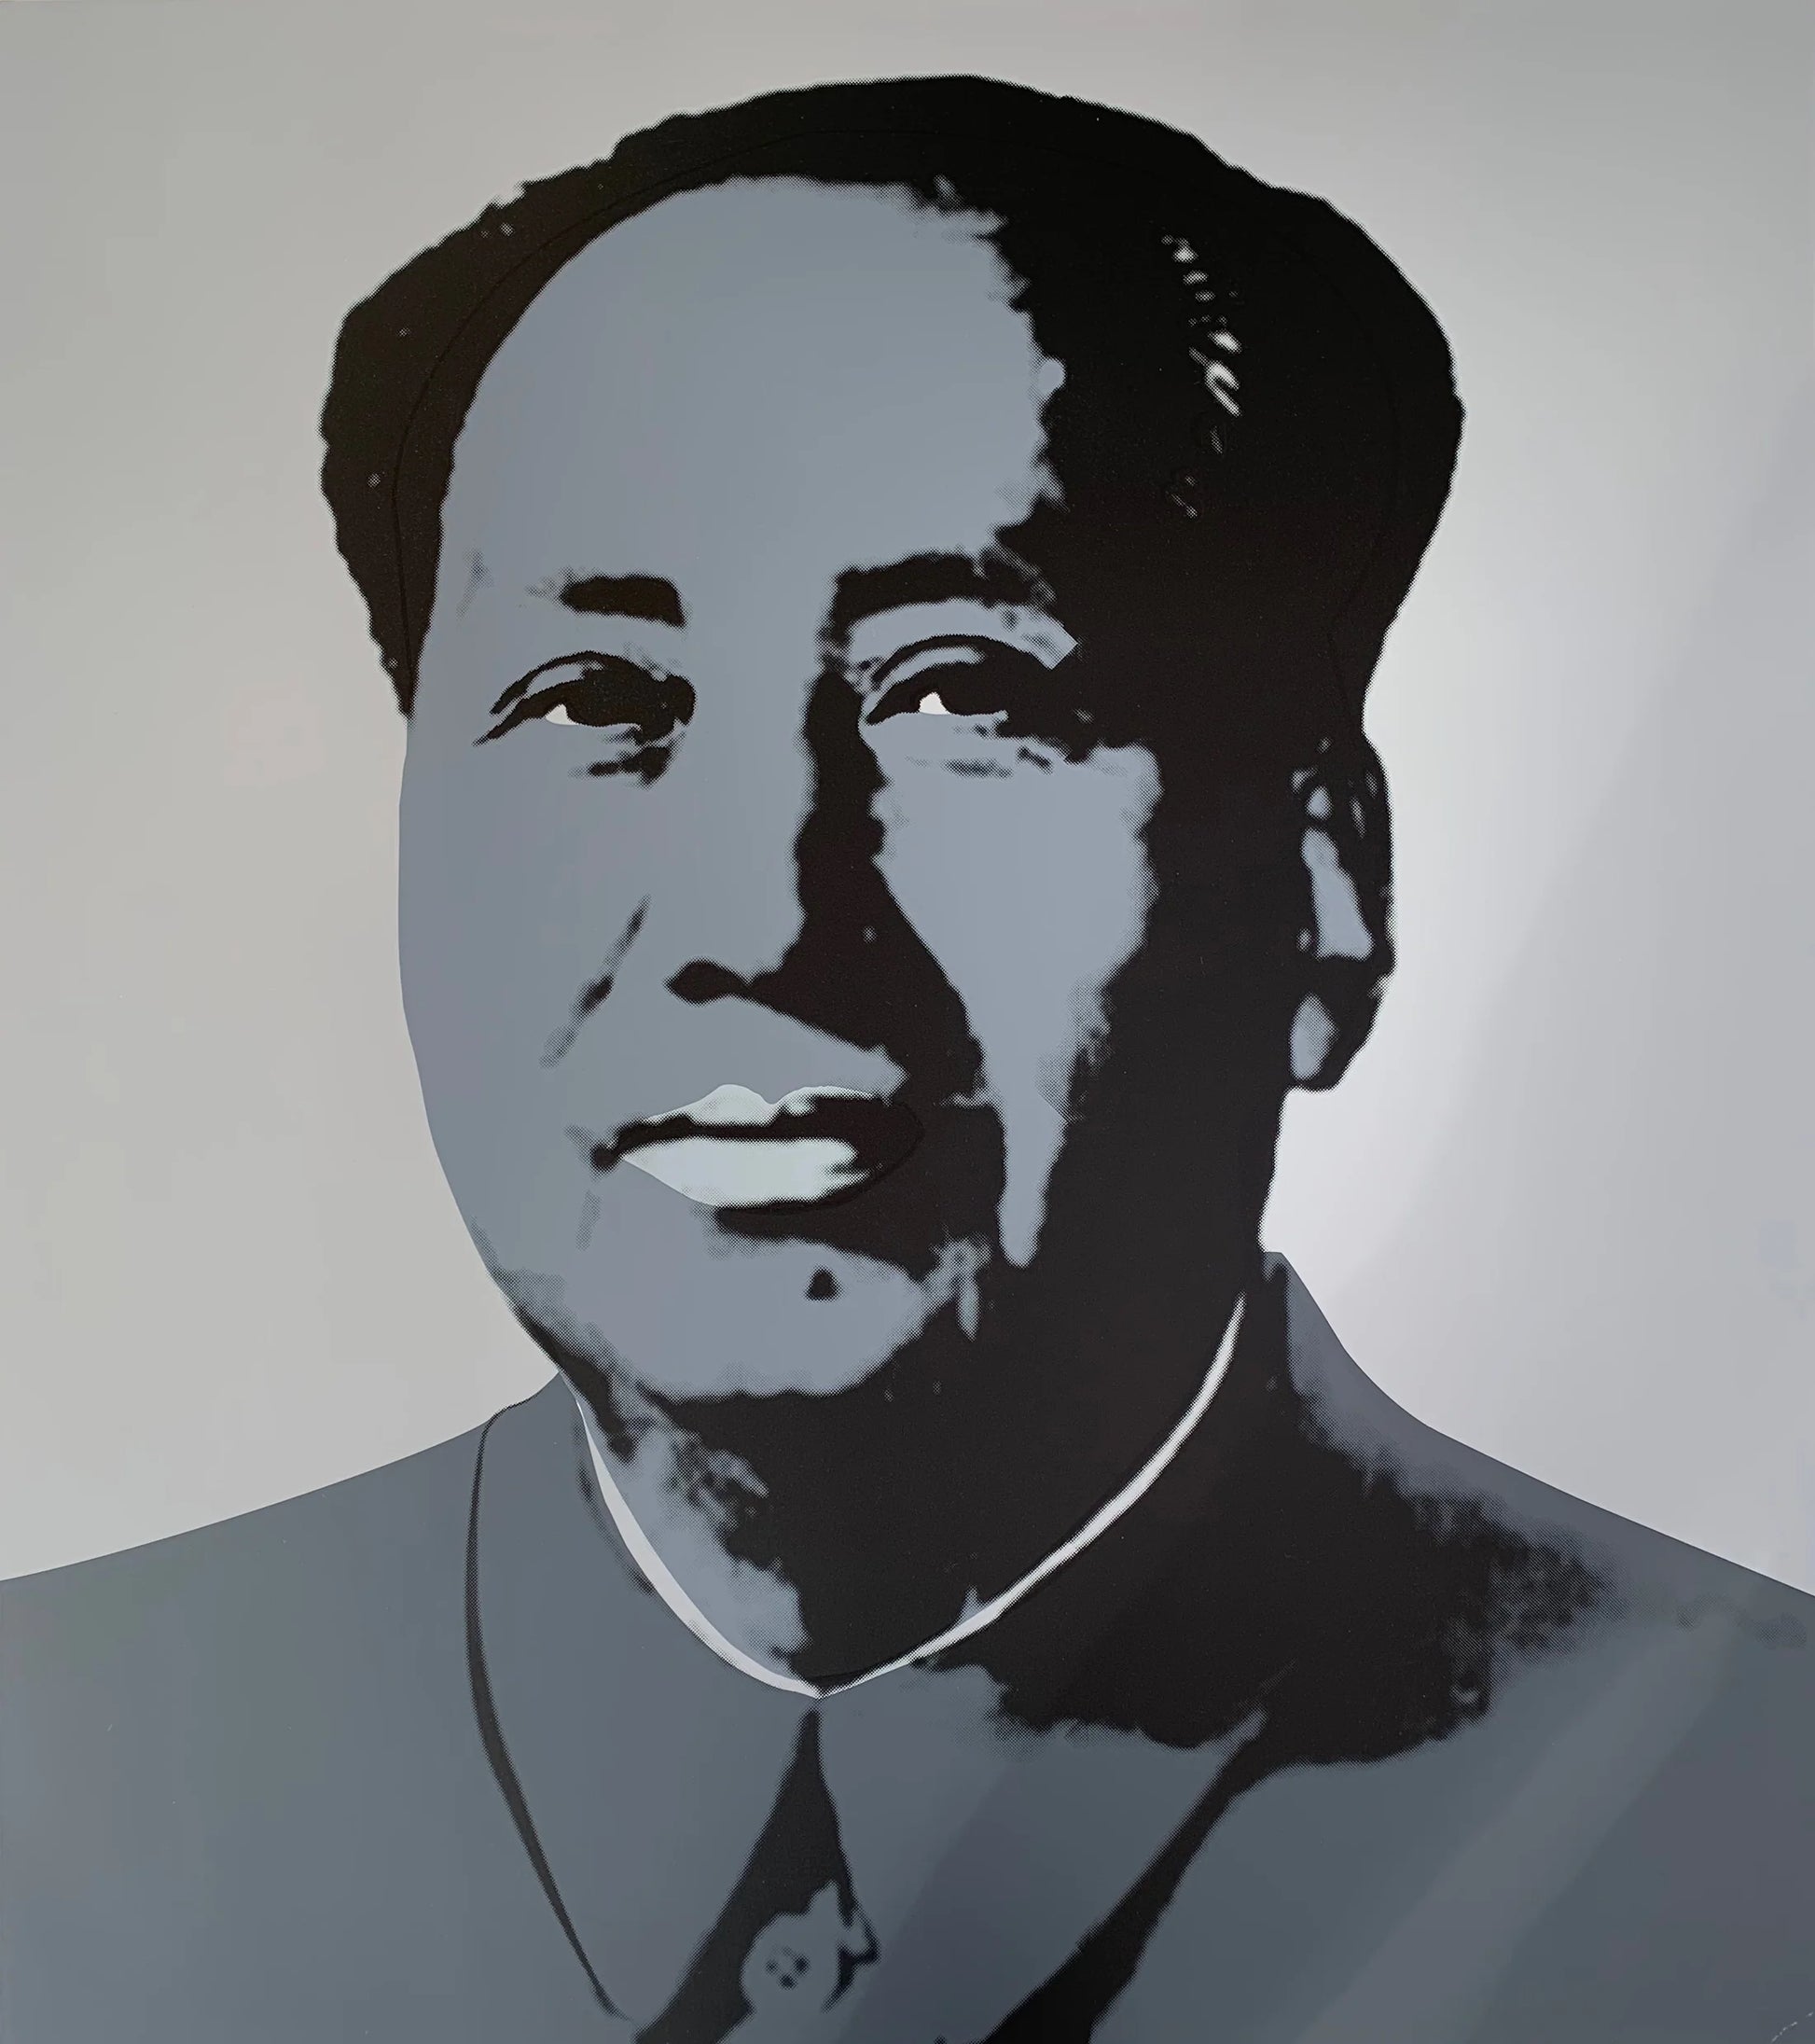 this is an image of a Sunday B Morning print of an artwork by Andy Warhol titled 'Mao Grey'. the artwork features an image of general Mao screenprinted in greyscale, with pointillated shadows. this is a sunday b morning print for sale.